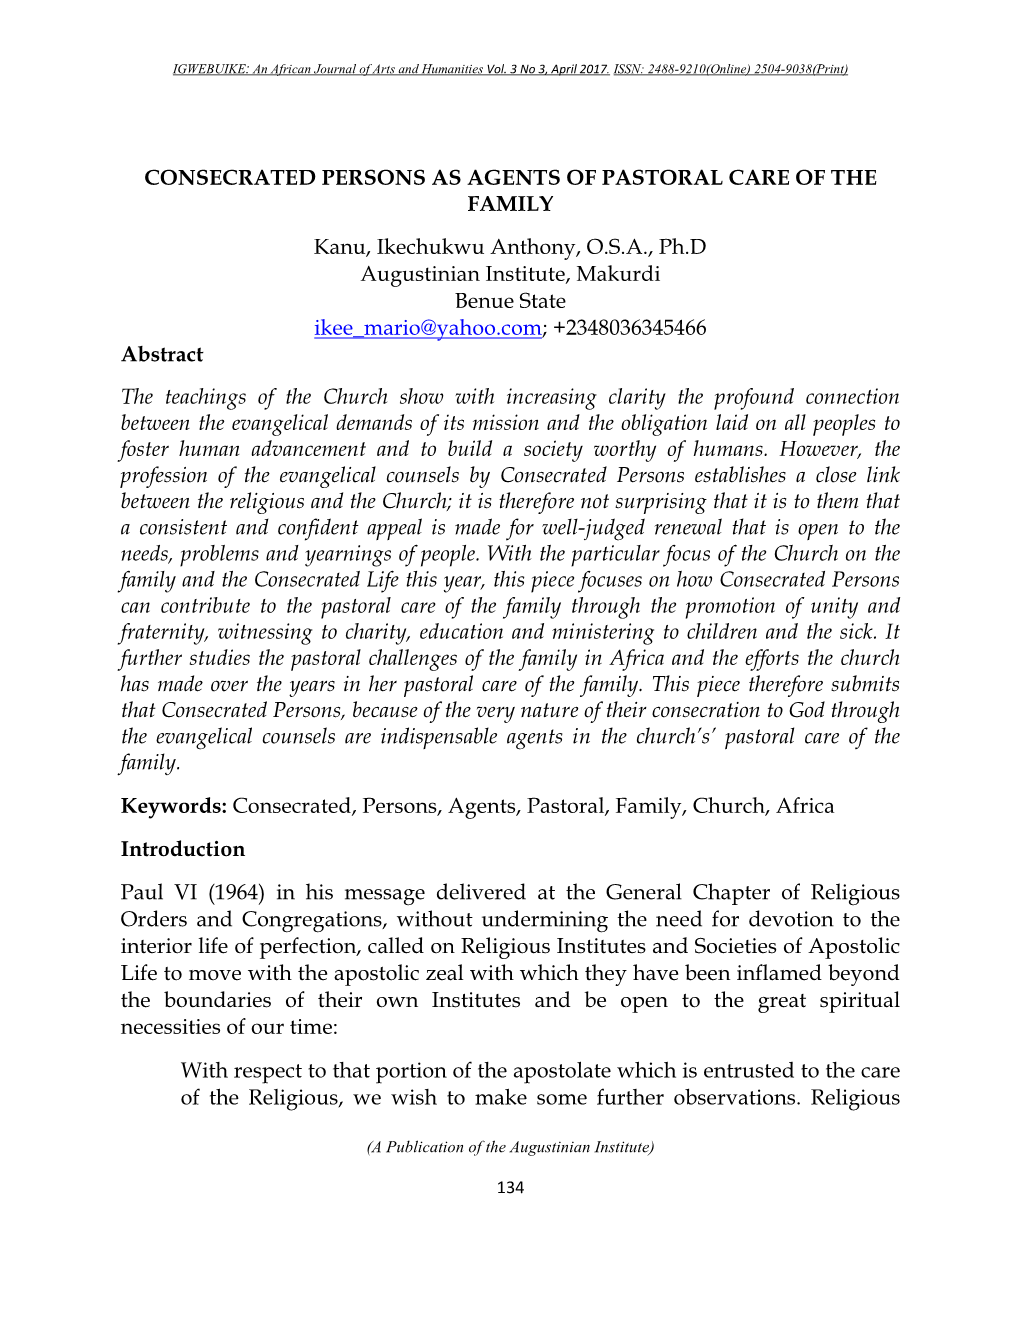 CONSECRATED PERSONS AS AGENTS of PASTORAL CARE of the FAMILY Kanu, Ikechukwu Anthony, O.S.A., Ph.D Augustinian Institute, Makurd